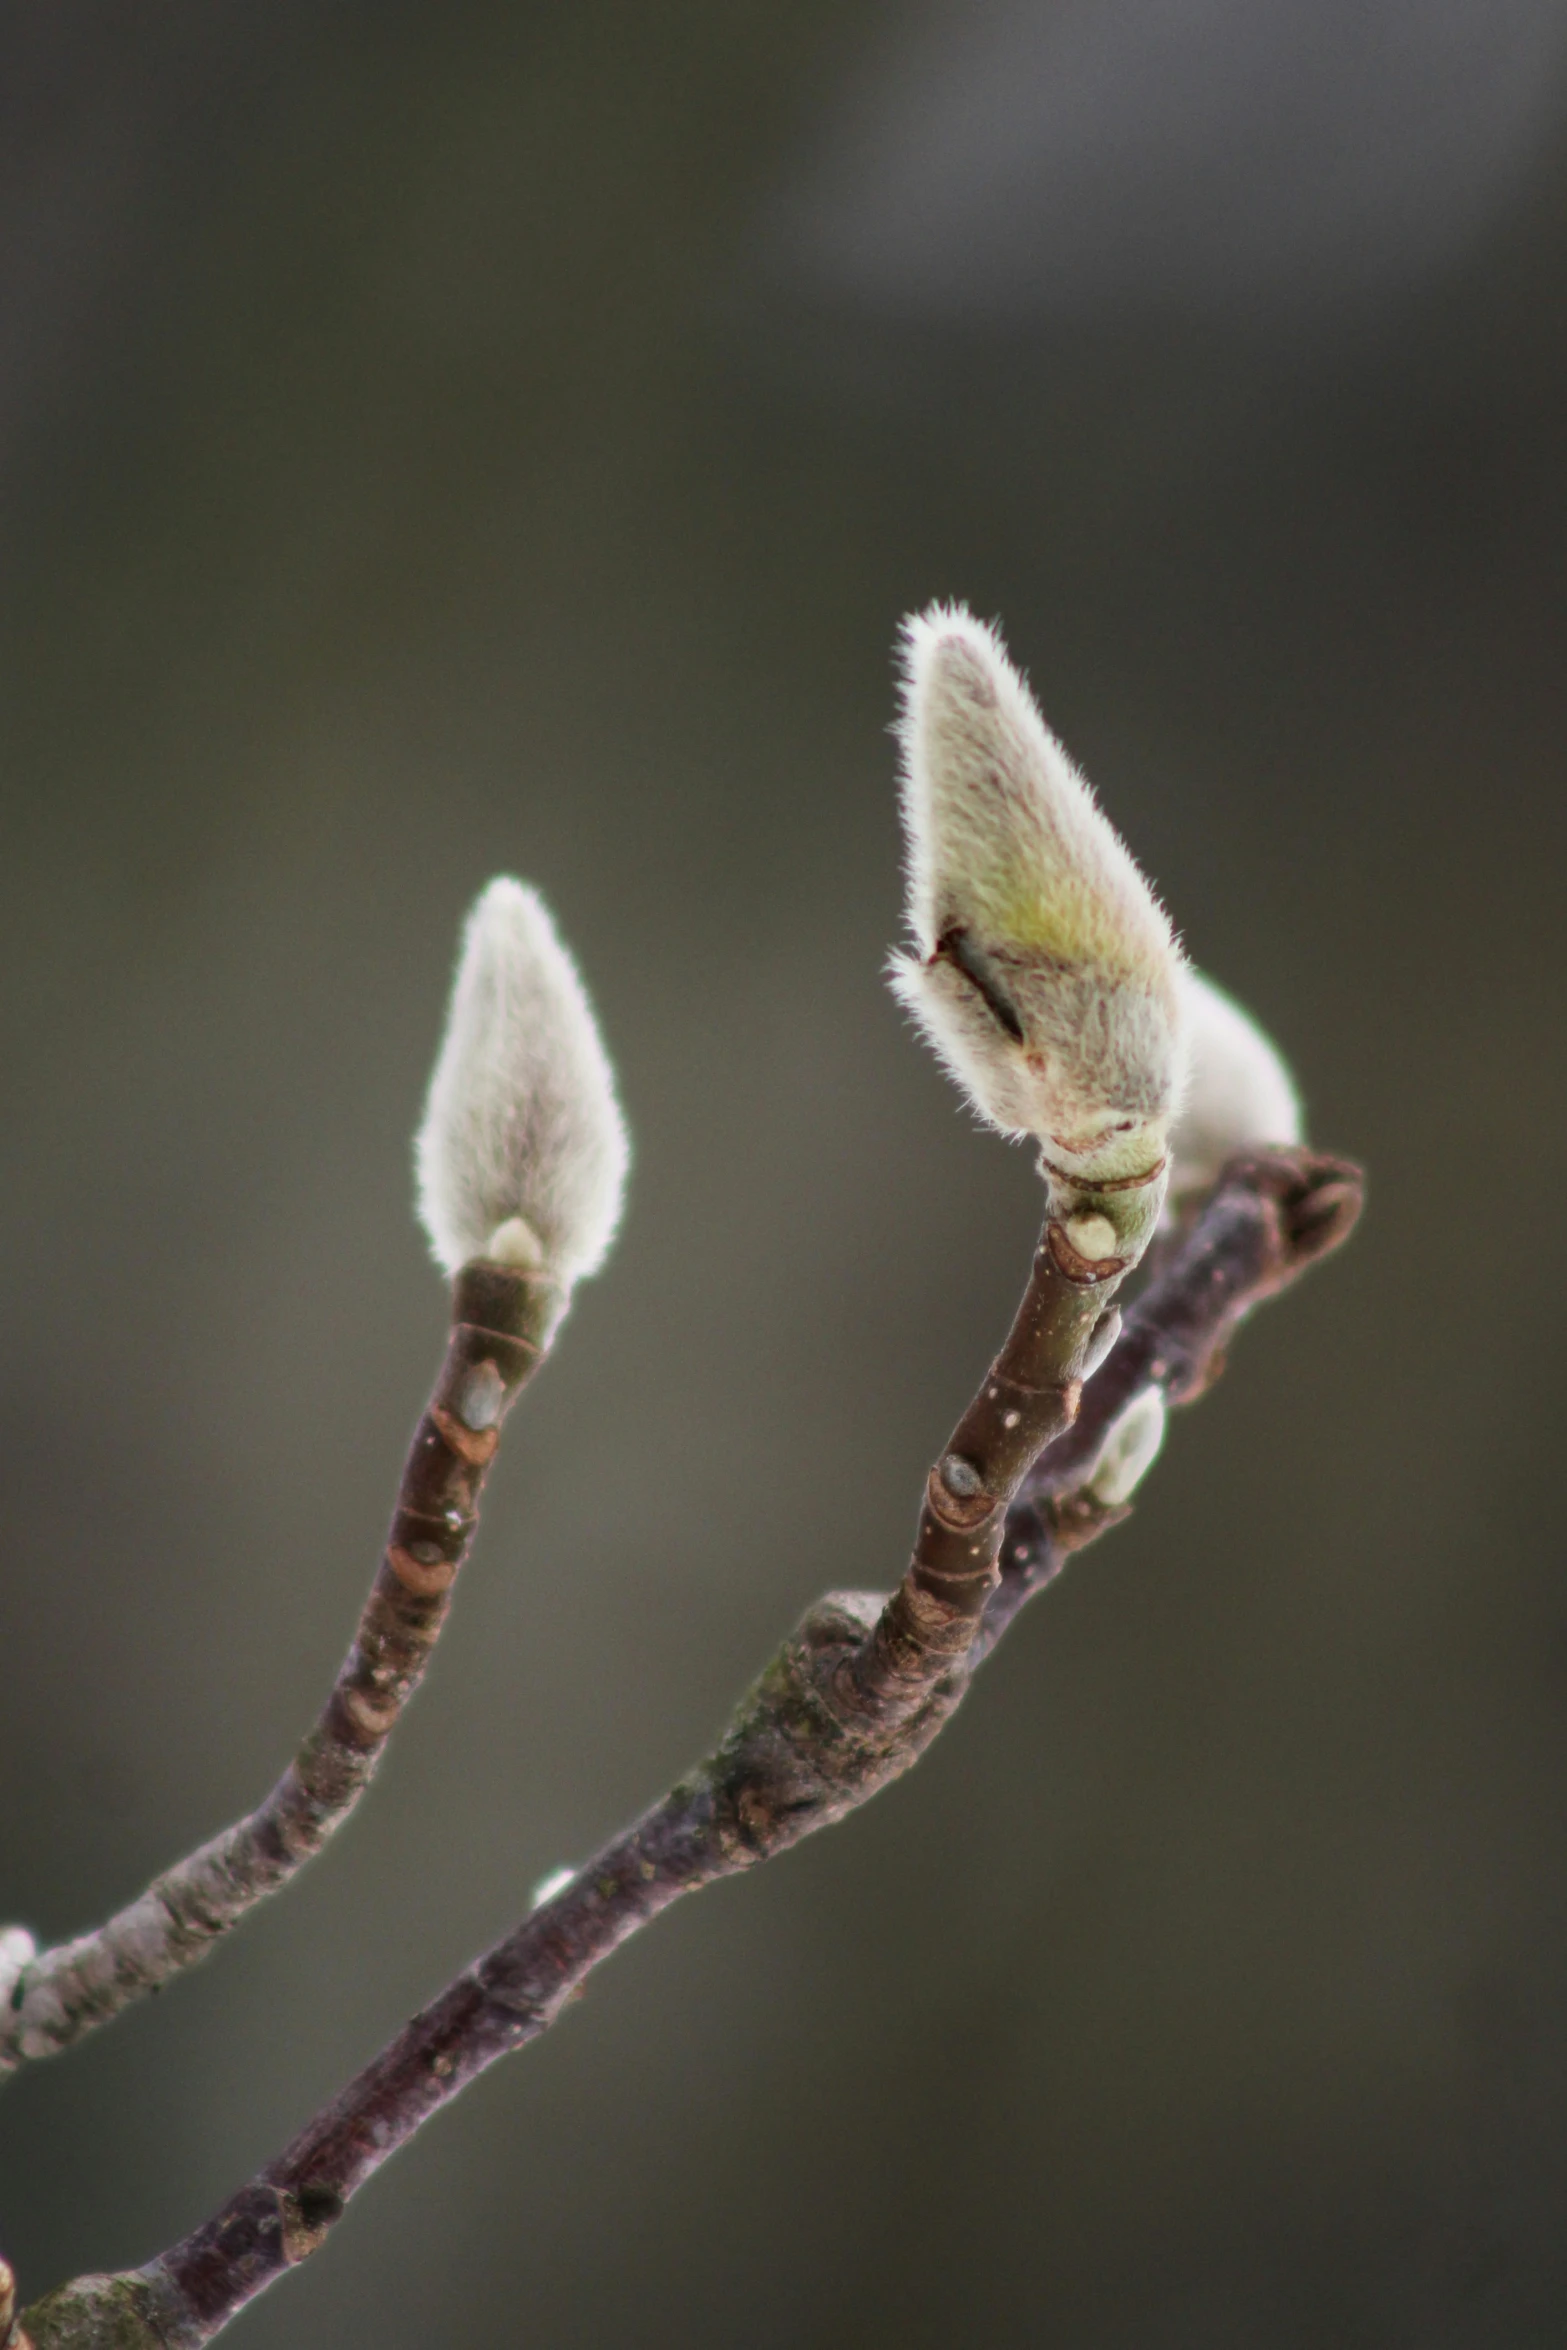 three buds on the nch of a tree